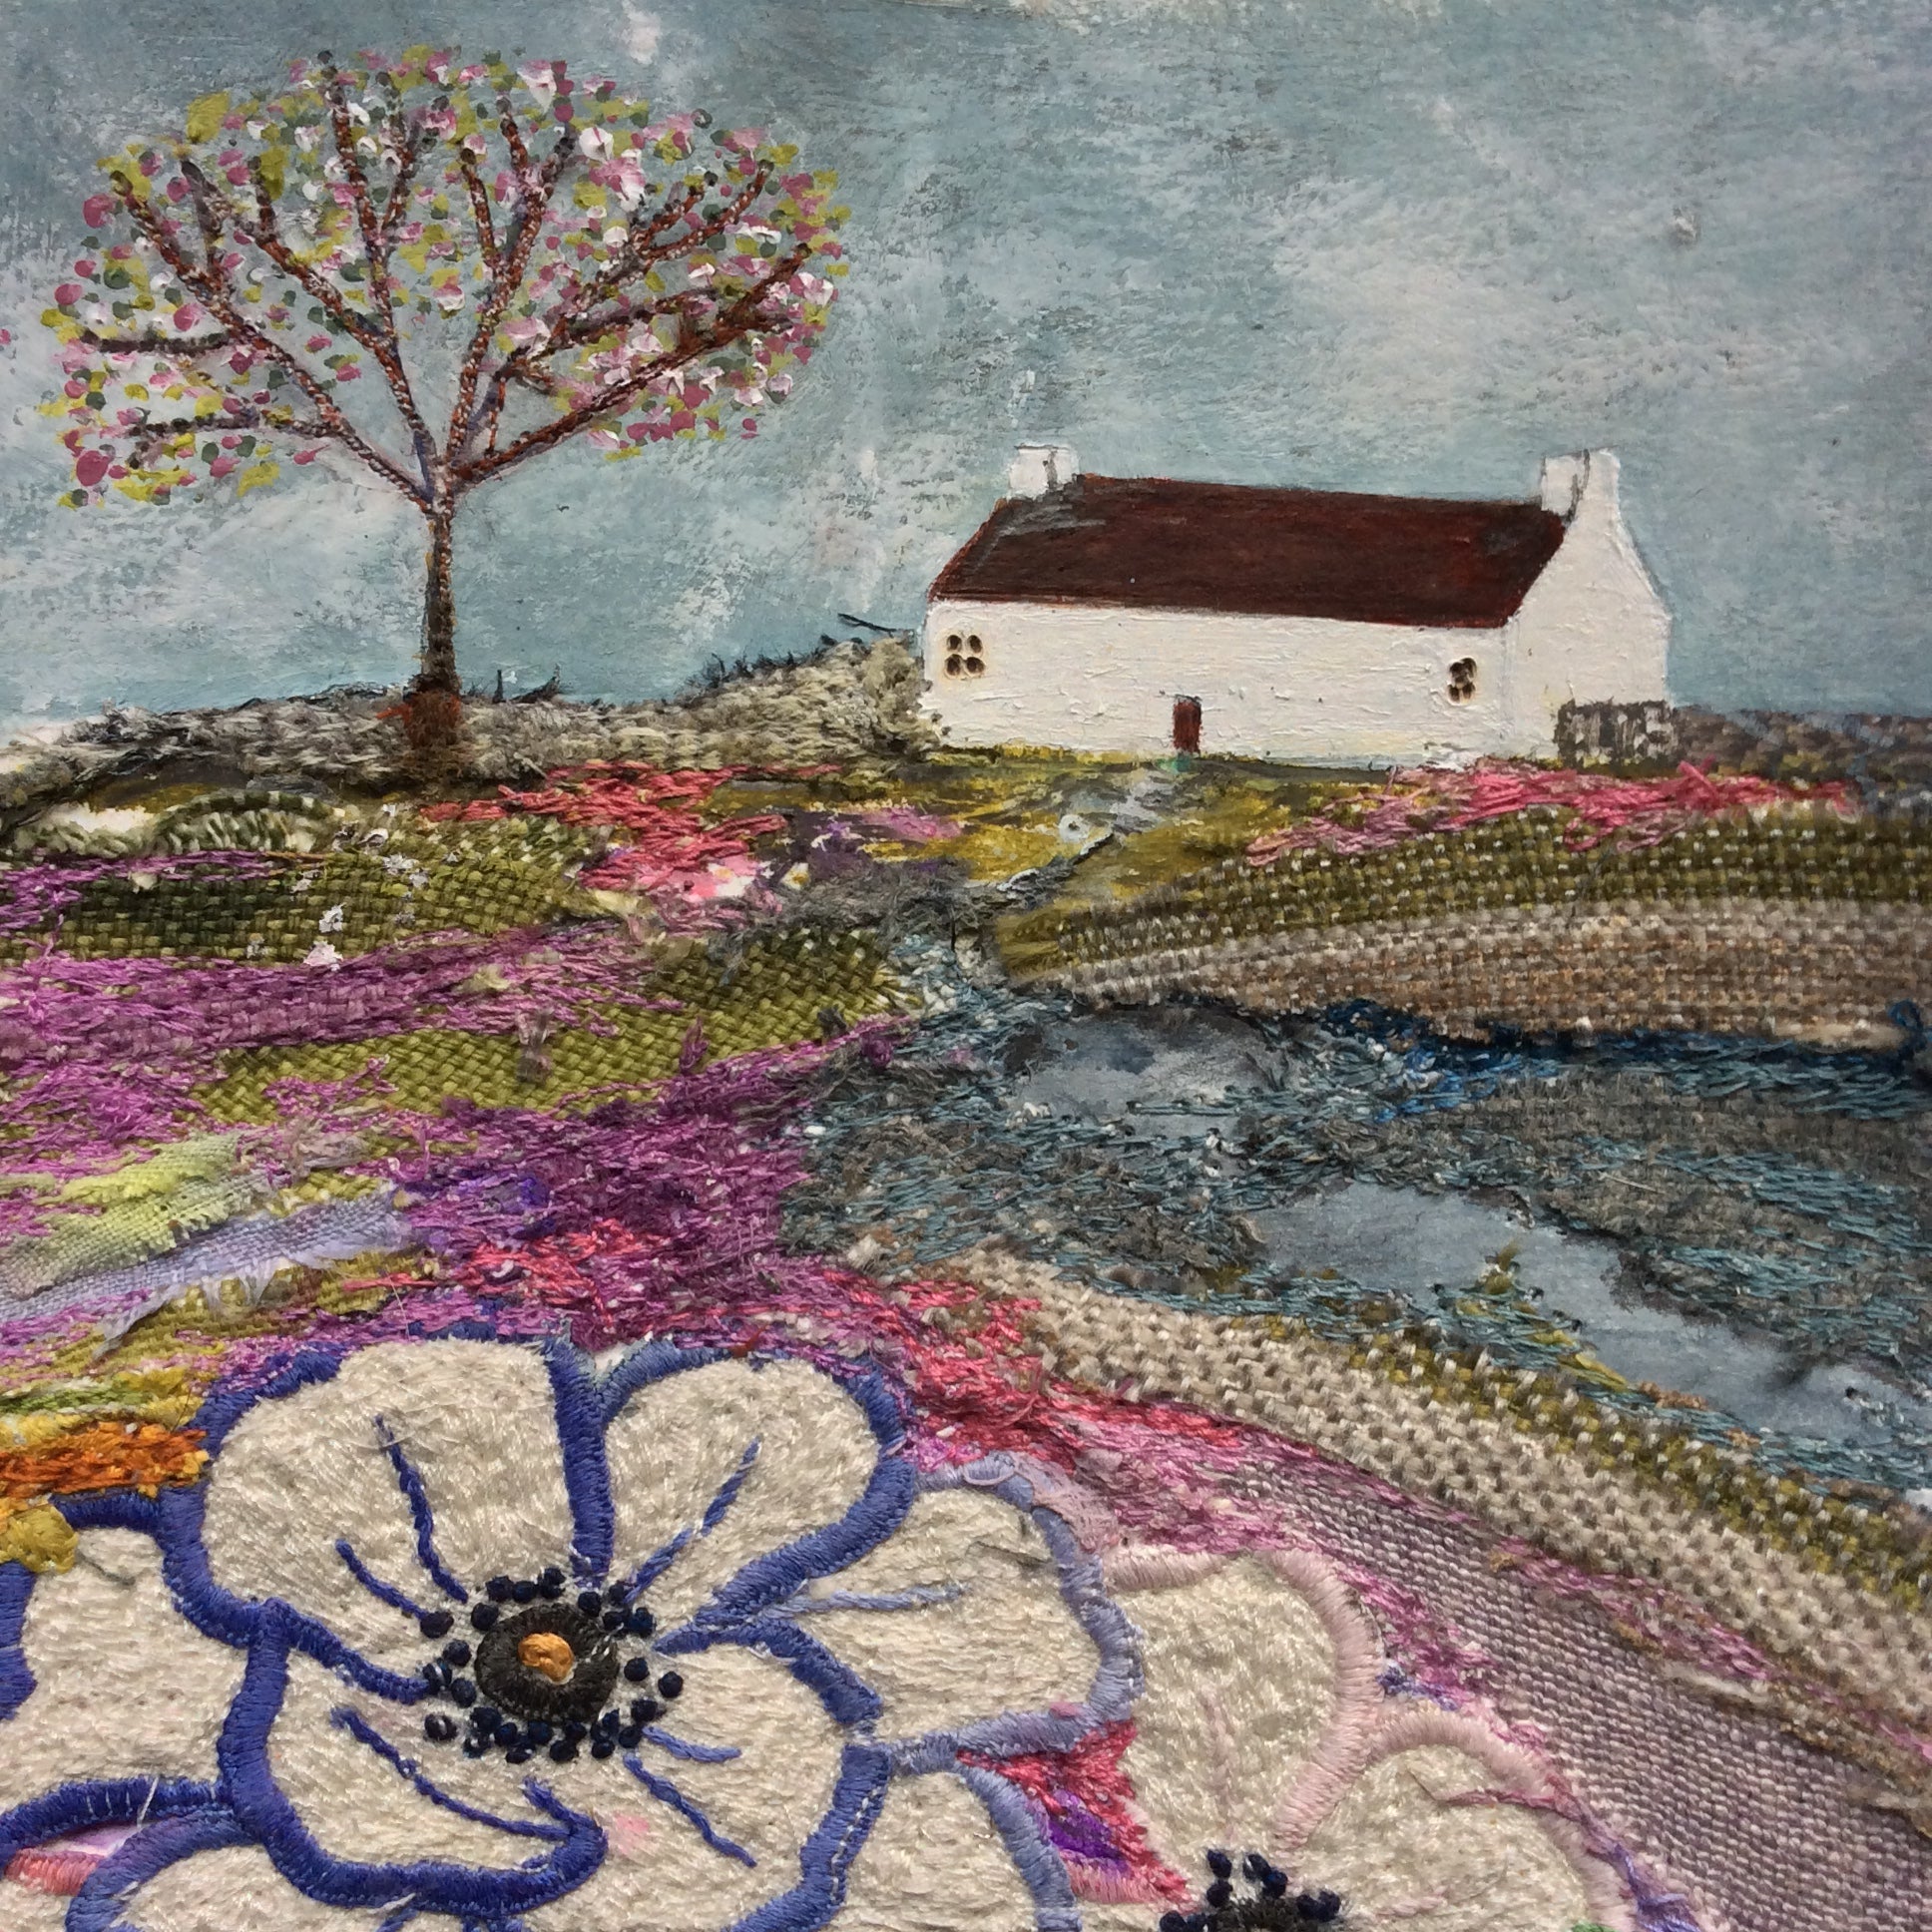 Mixed Media Art By Louise O'Hara - "Apple blossom cottage"